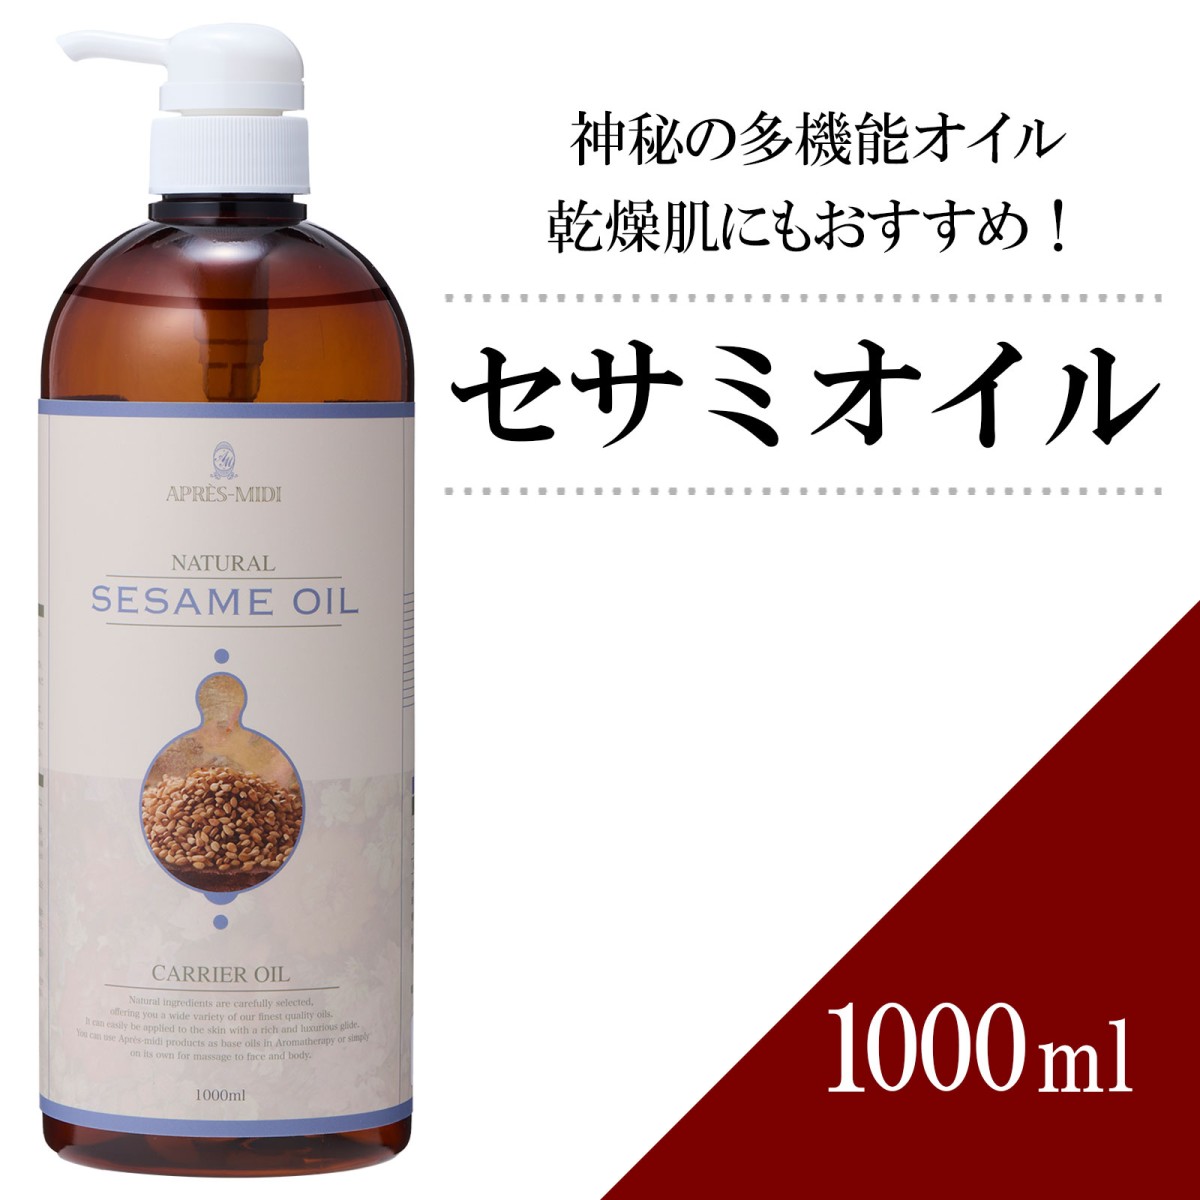  sesame oil [ free shipping ] 1000mla pre midi carrier oil [ natural 100%] no addition towa Tec massage oil base oil aroma high capacity business use 